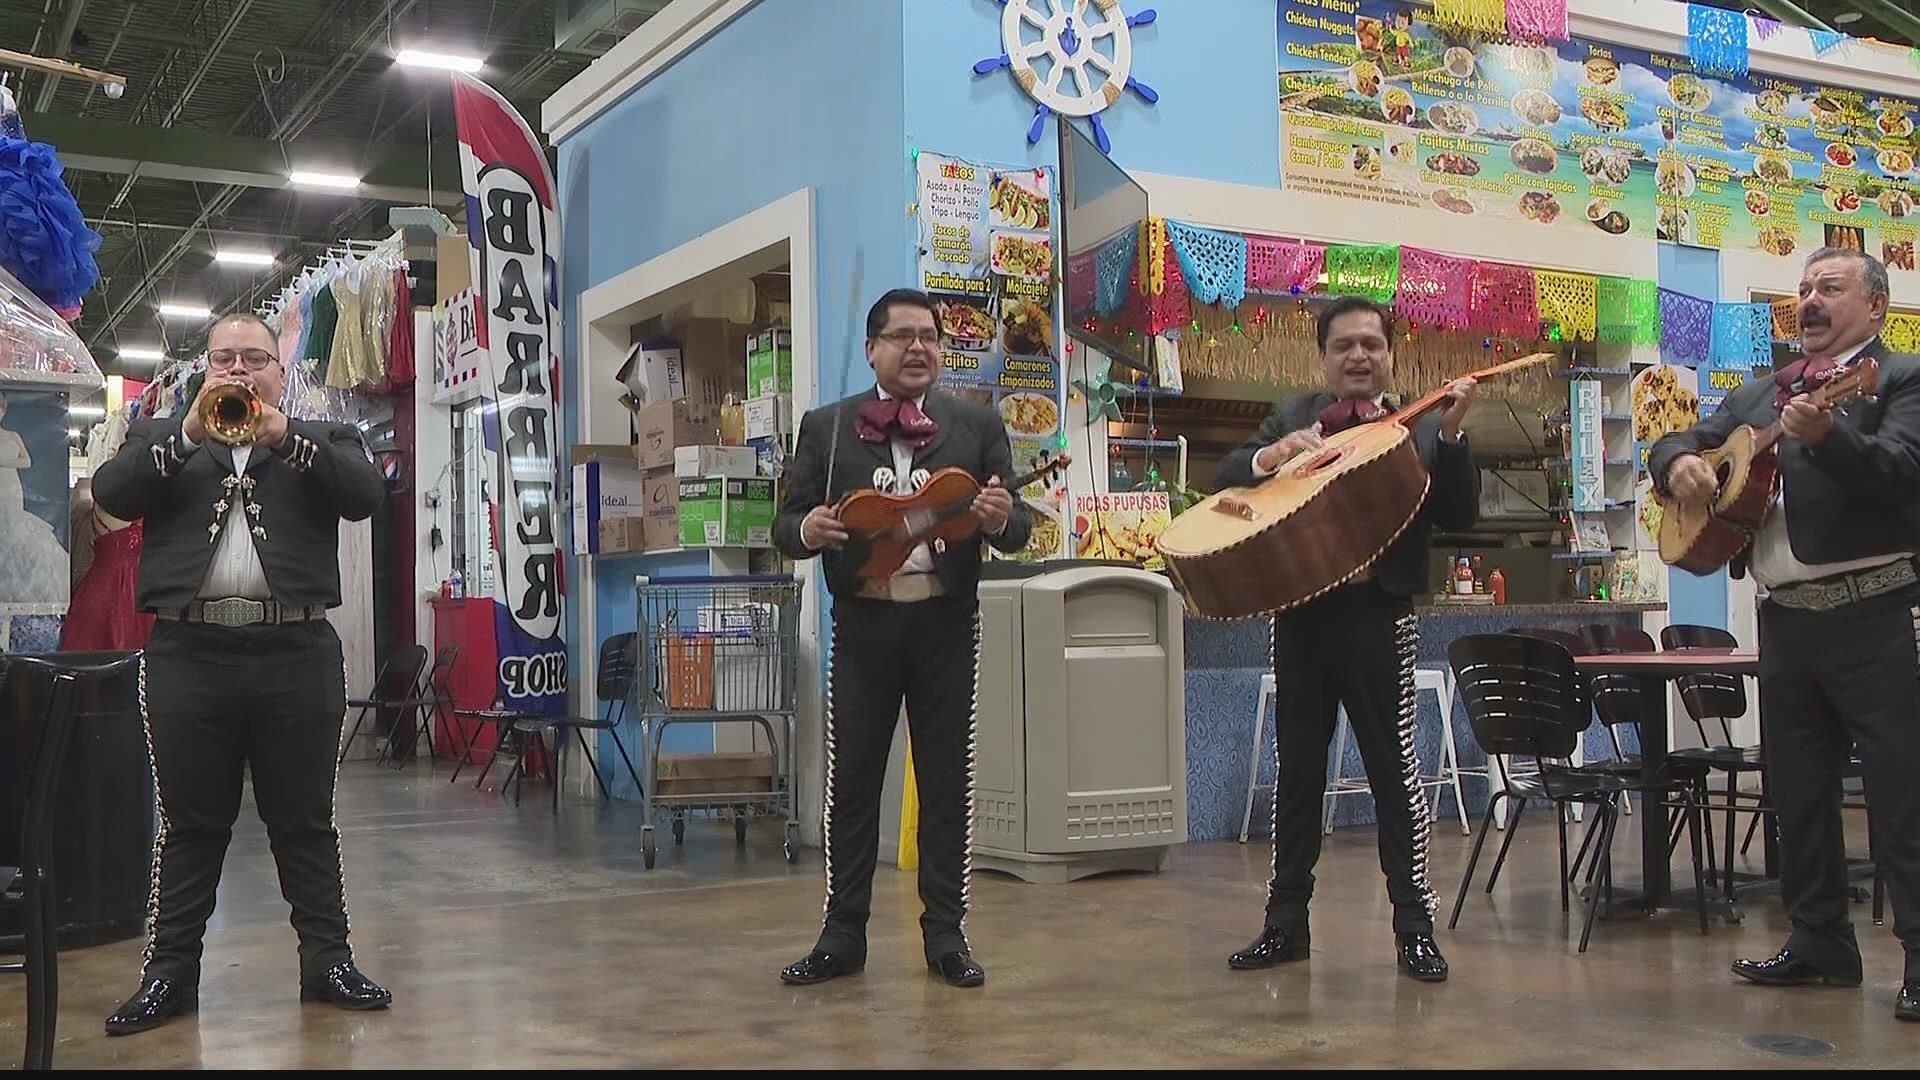 One local group is using their music to ring in their Mexican roots.